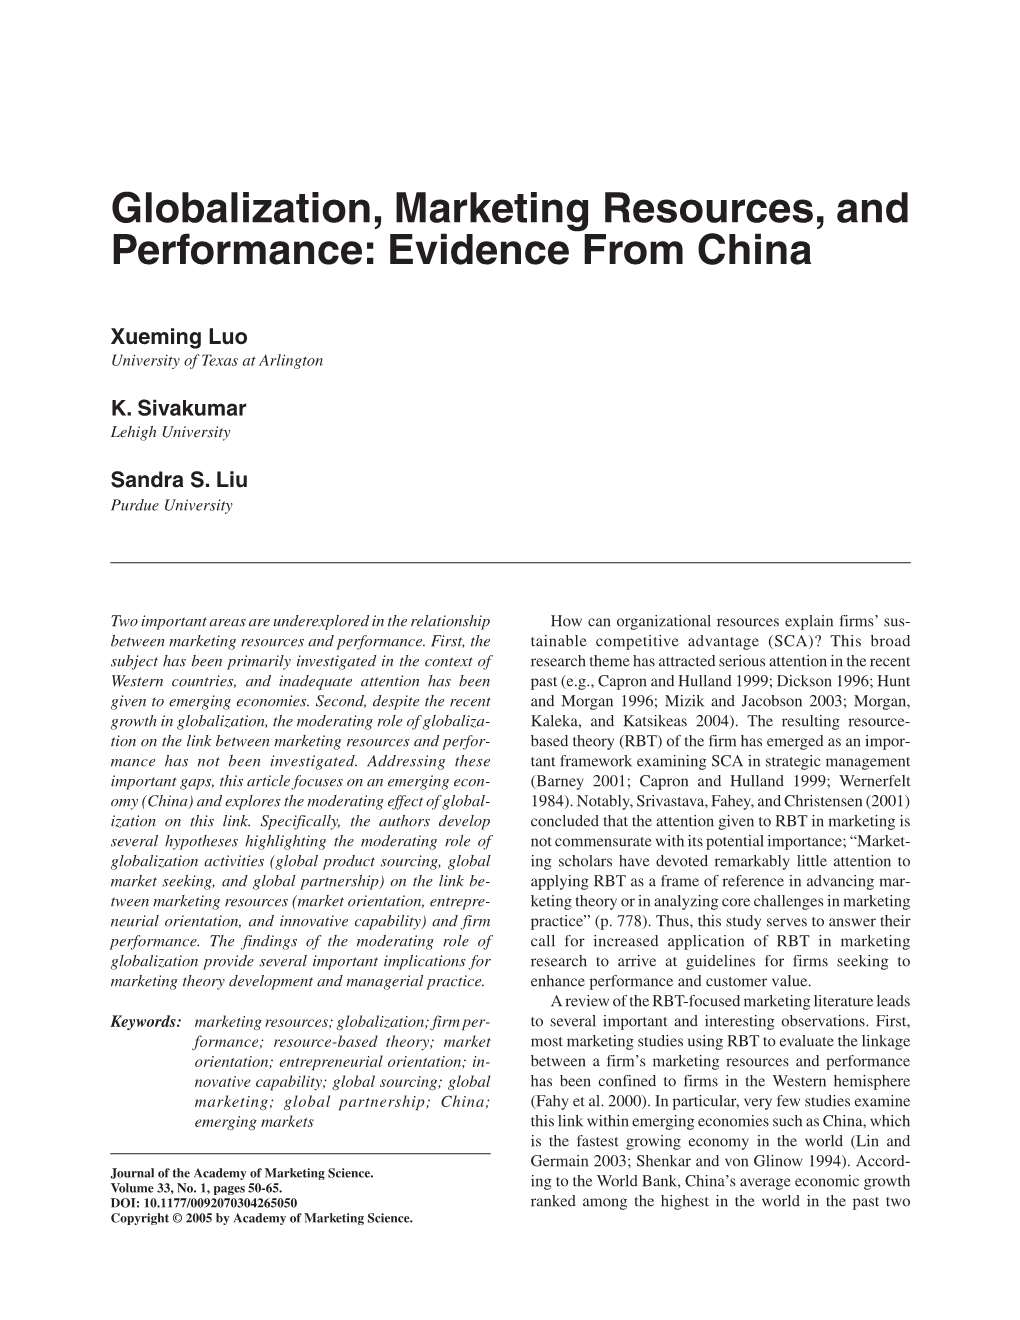 Globalization, Marketing Resources, and Performance: Evidence from China